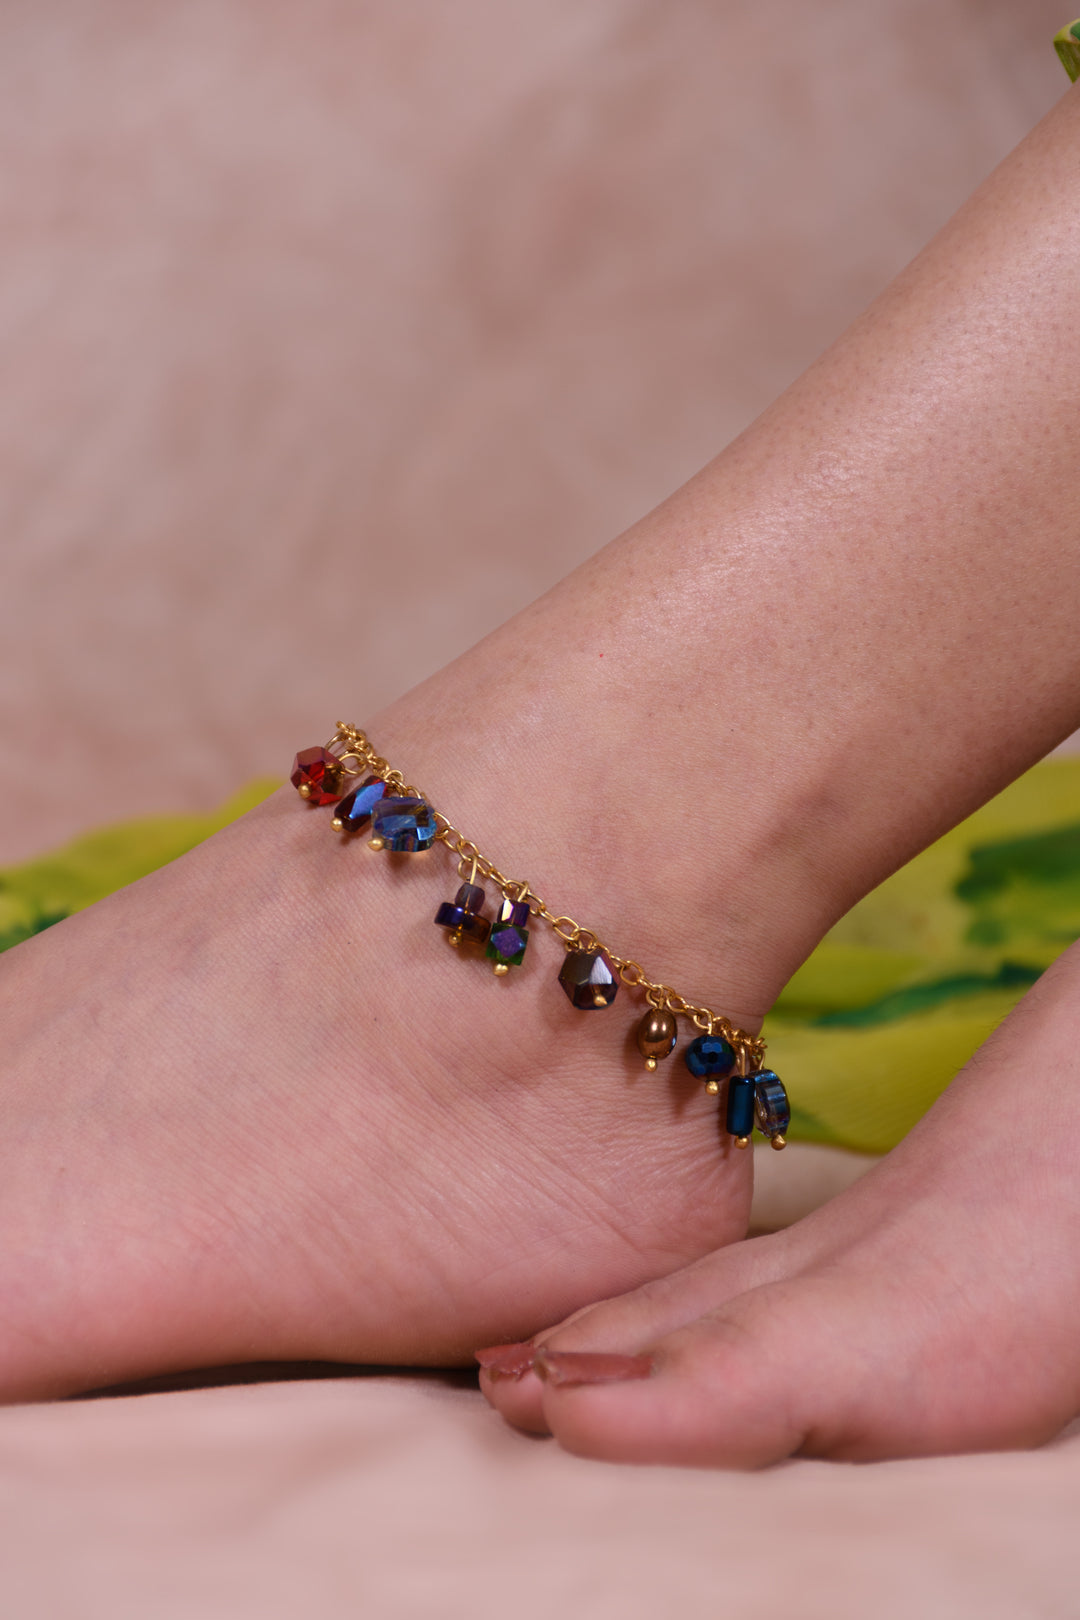 Gold Polished Metal Chains Anklet With Multi Shaped Glass Beads Hanging On It